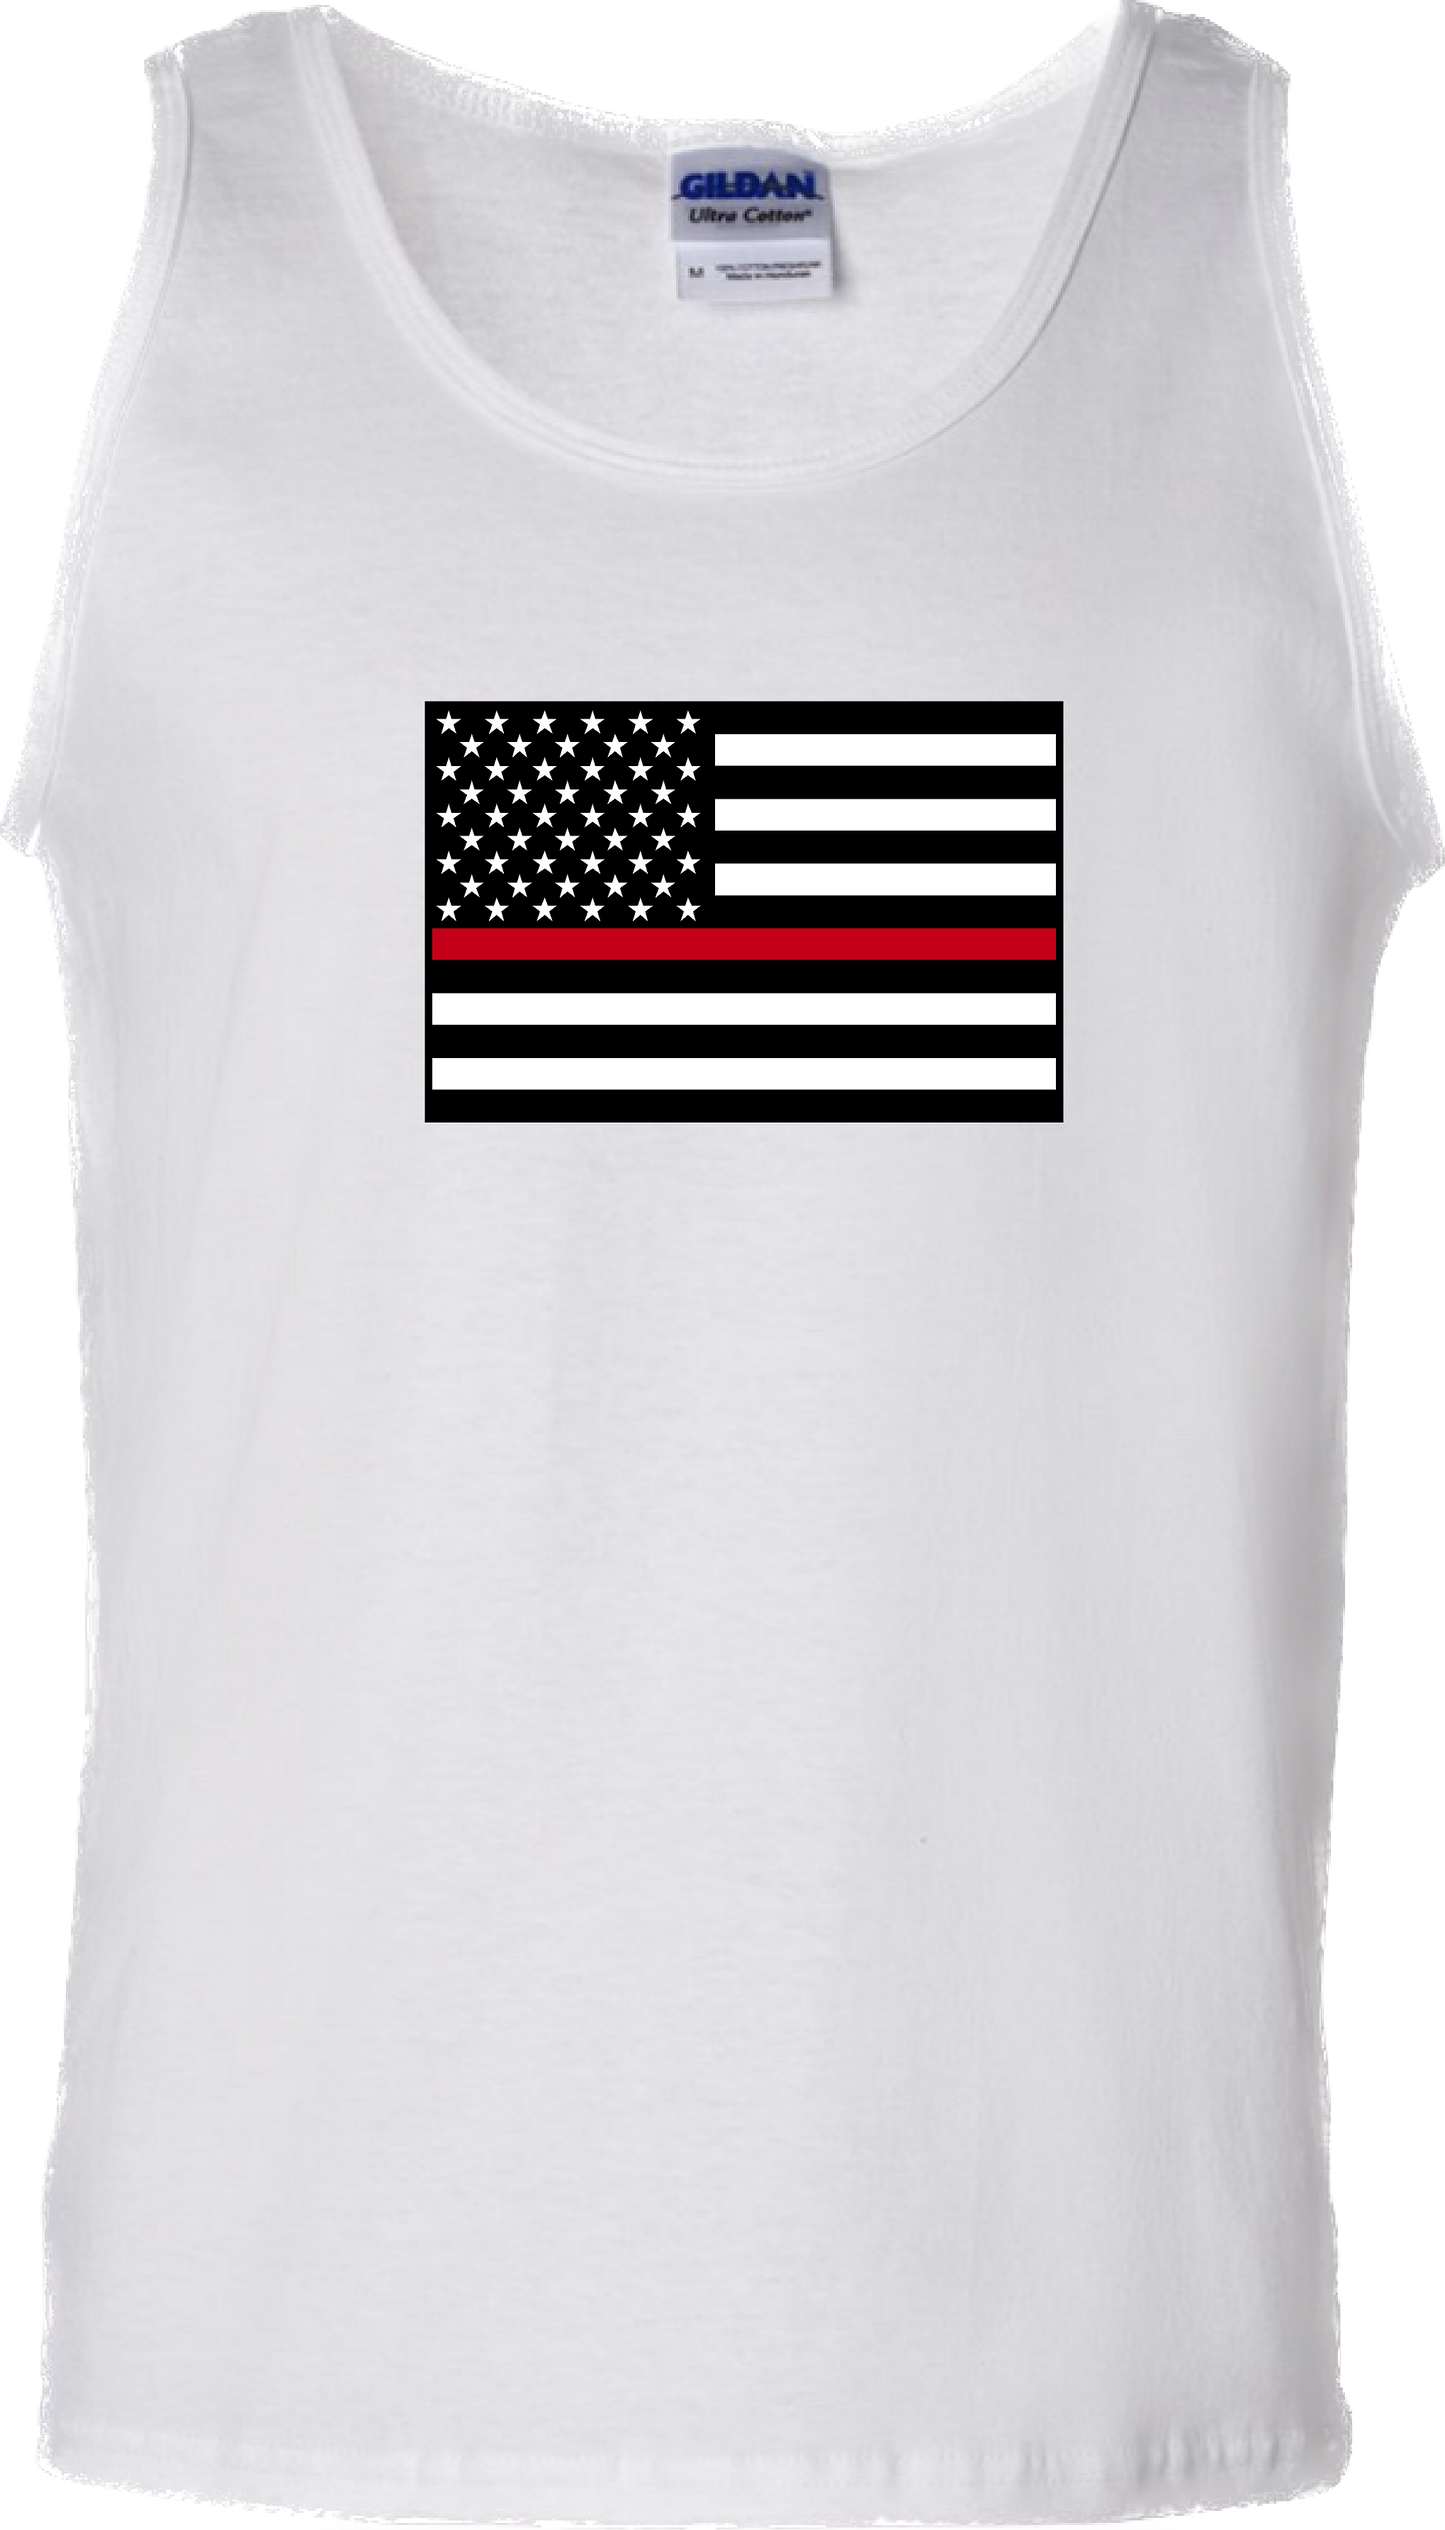 Men’s Thin Red Line United States Flag Tank Top